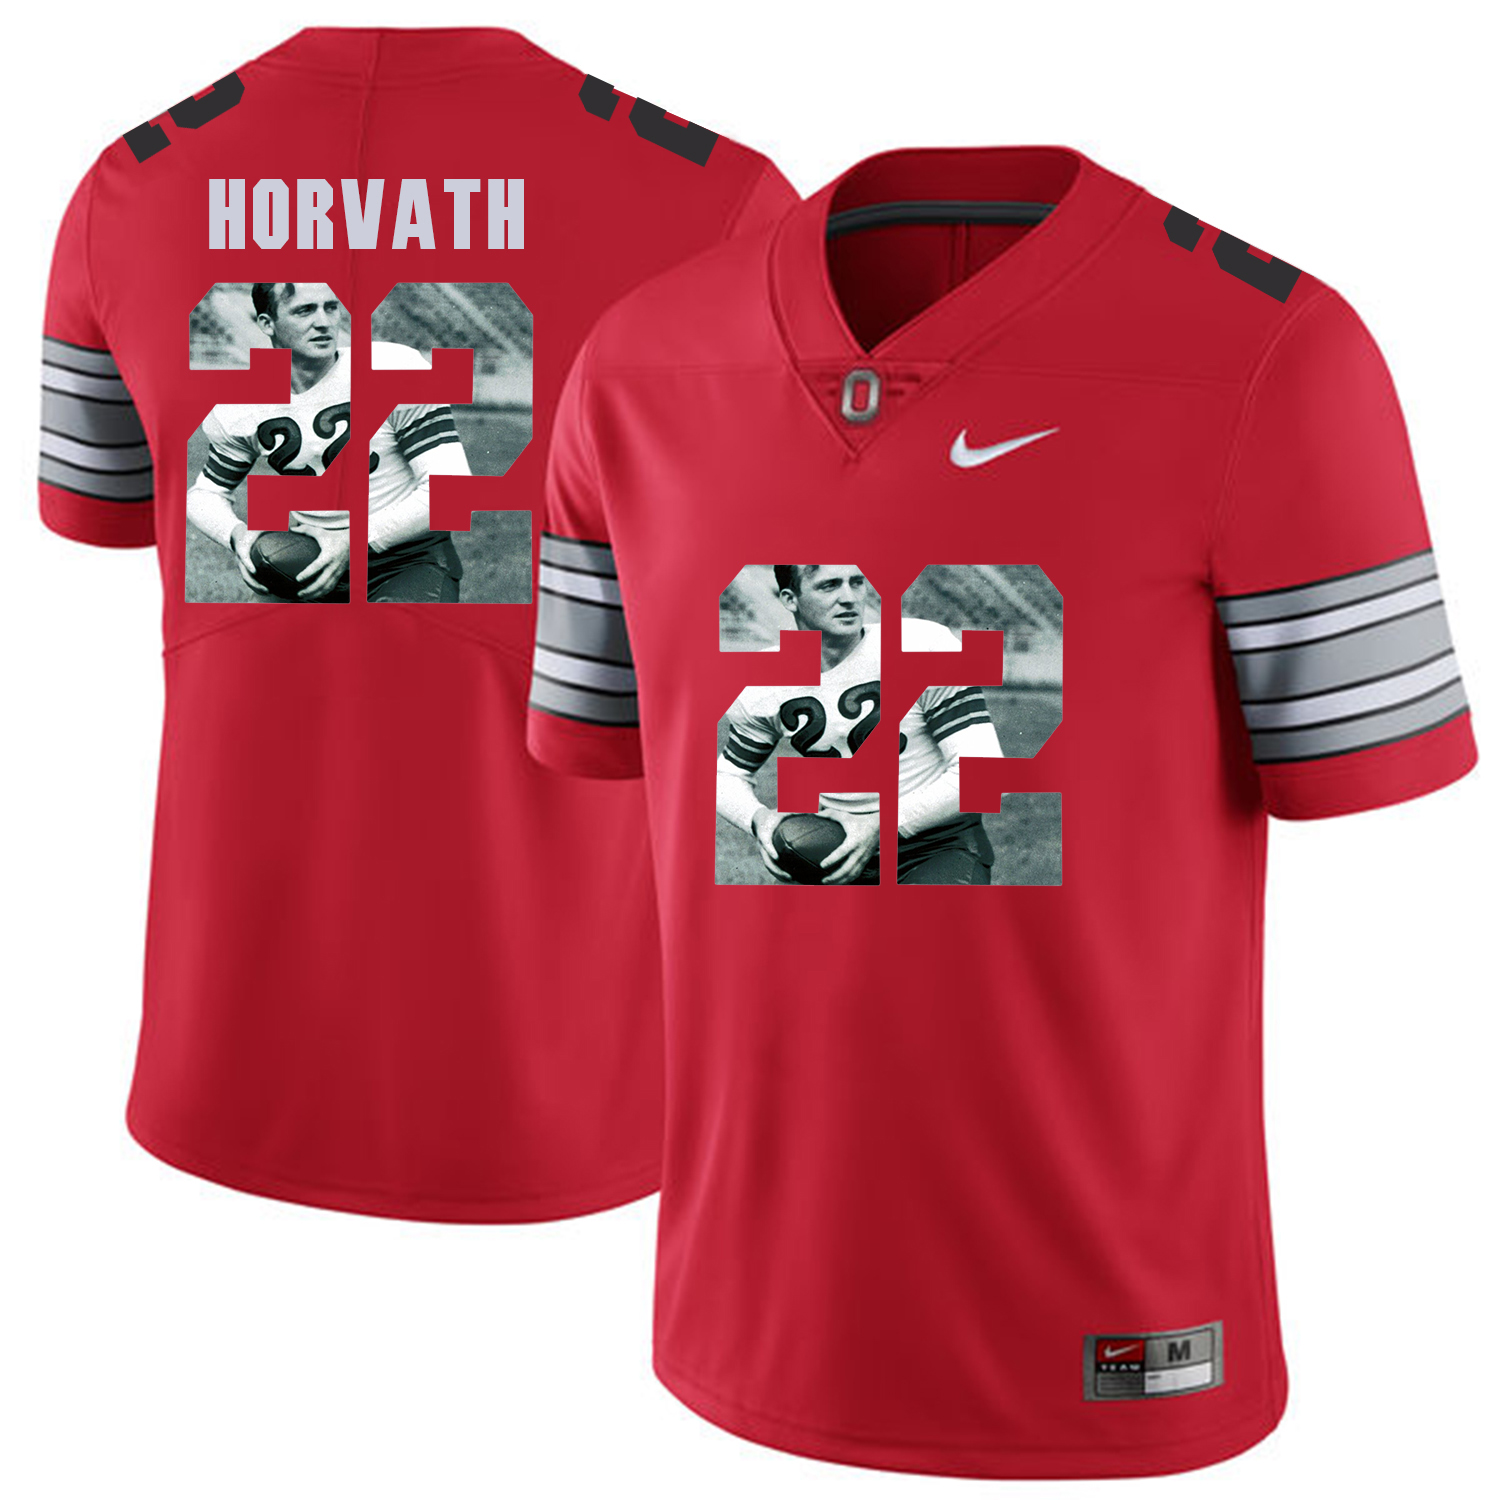 Men Ohio State 22 Horvath Red Fashion Edition Customized NCAA Jerseys